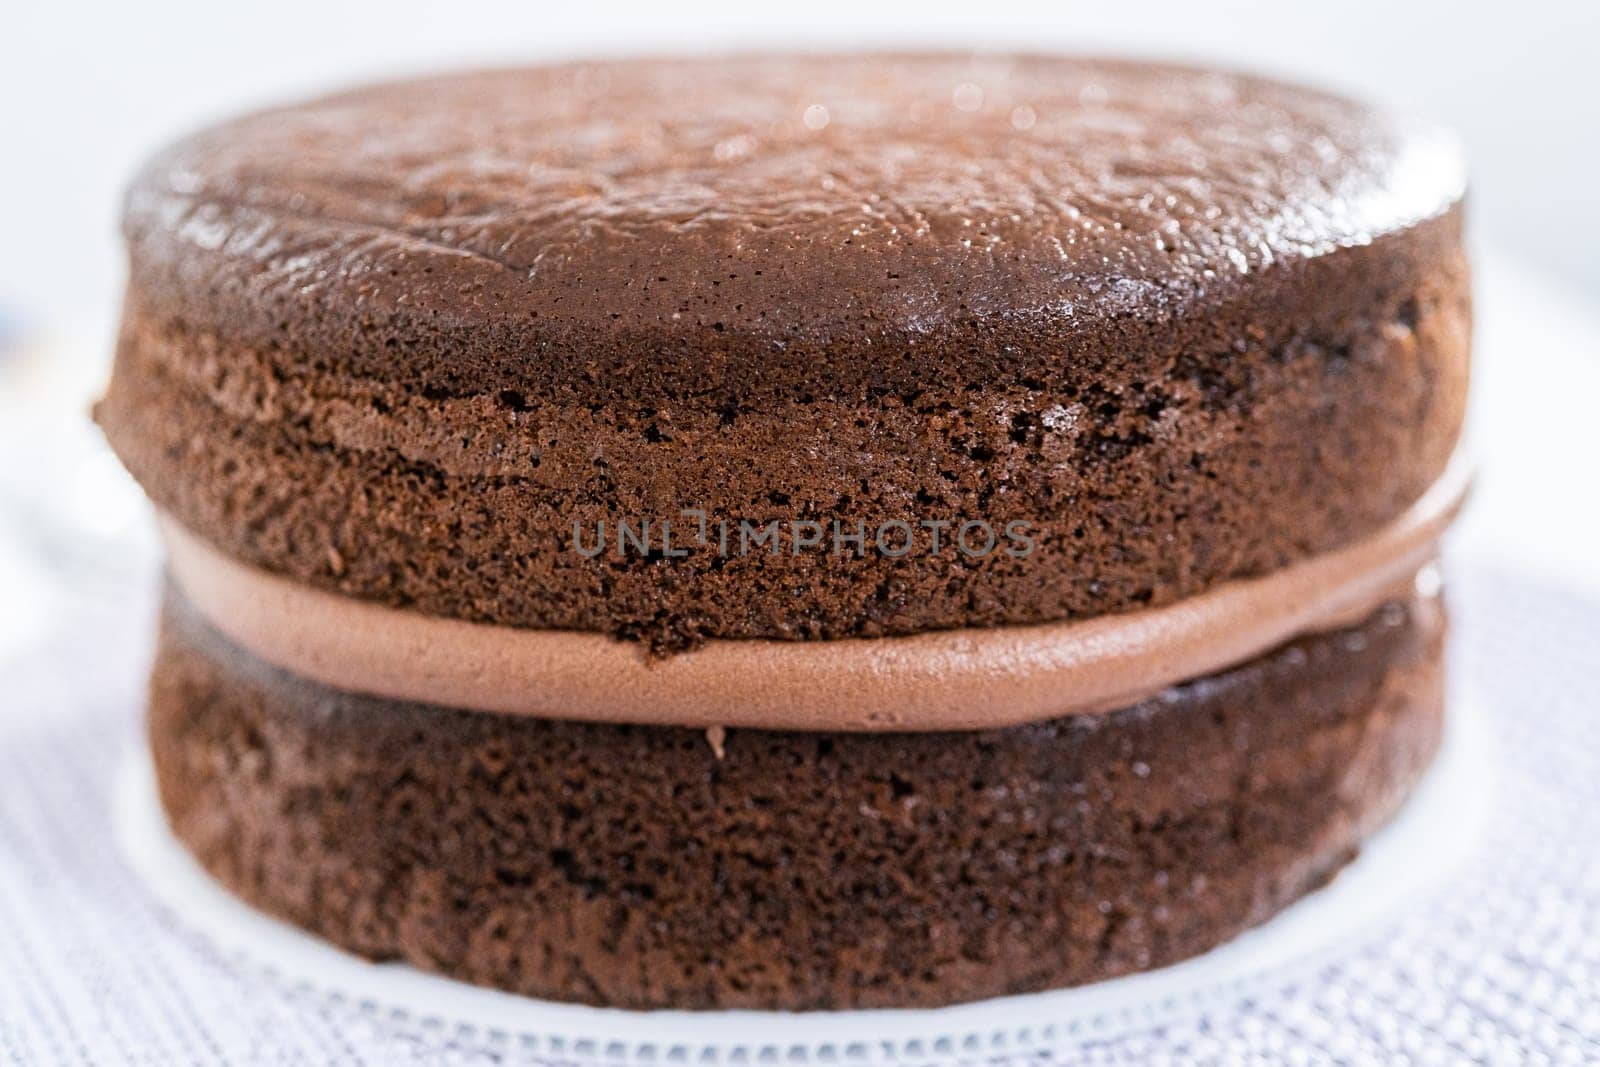 Covering chocolate cake with a crumb layer of chocolate buttercream frosting.